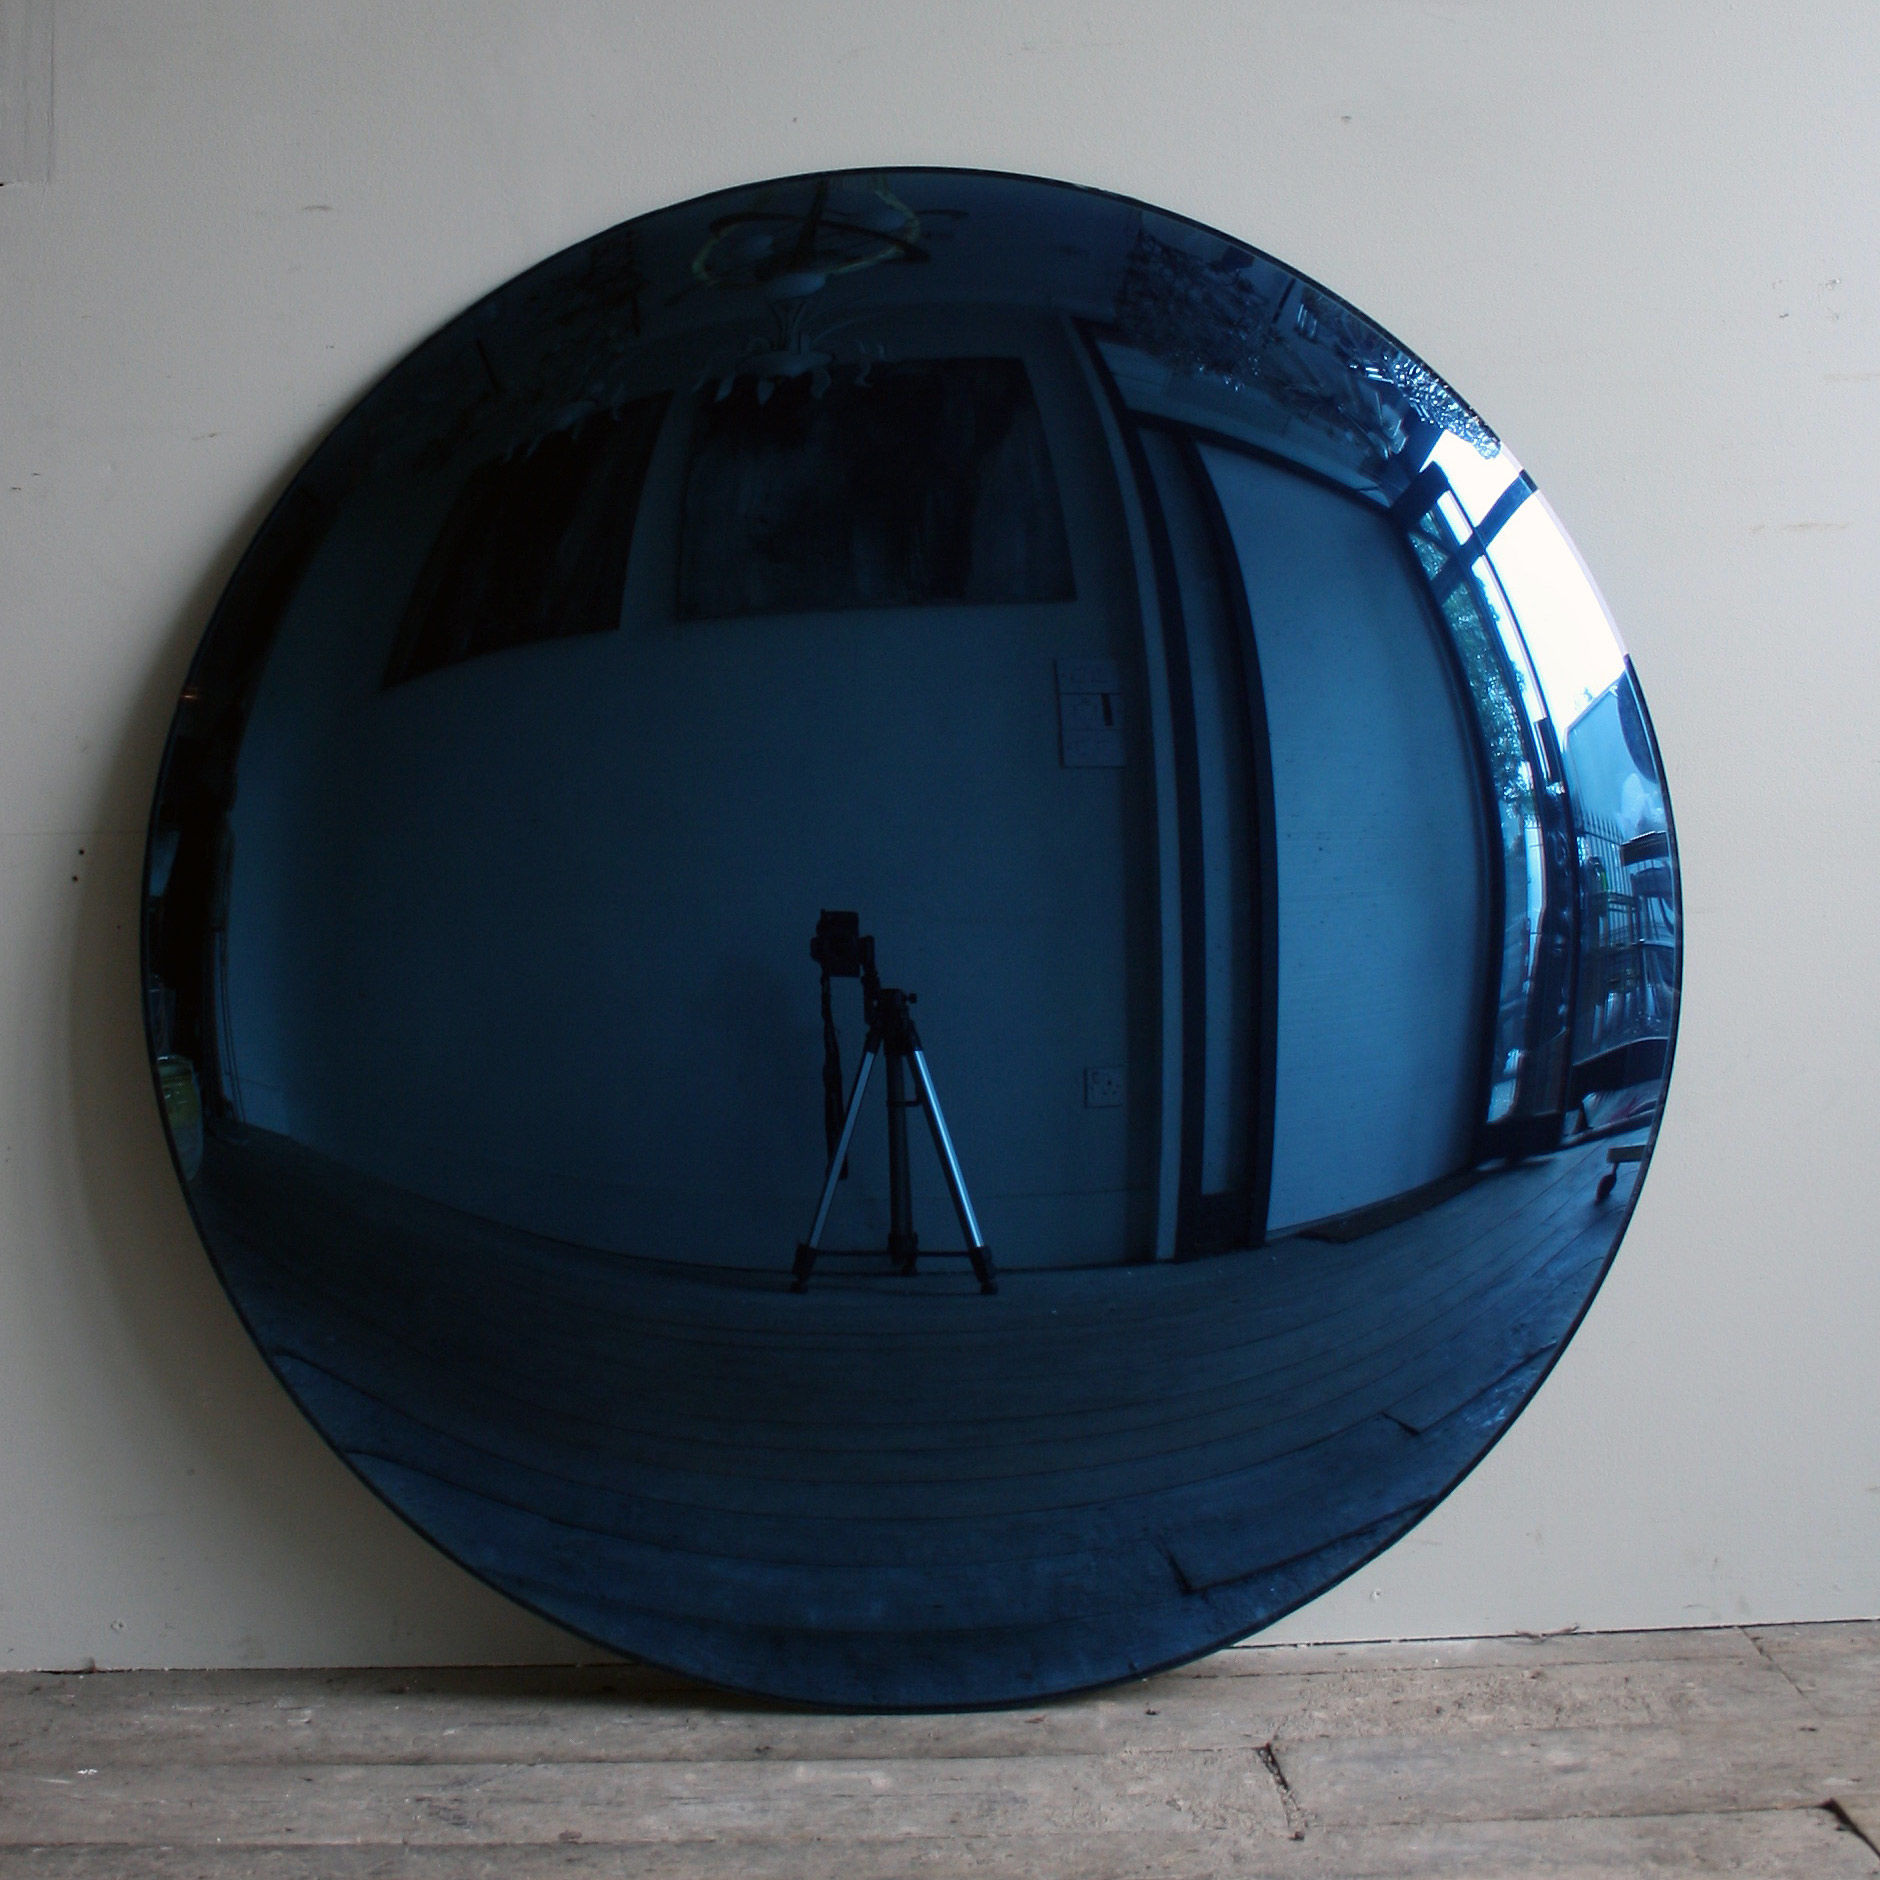 Glass Convex Mirror, Useful Mirror that You Can Use for Security